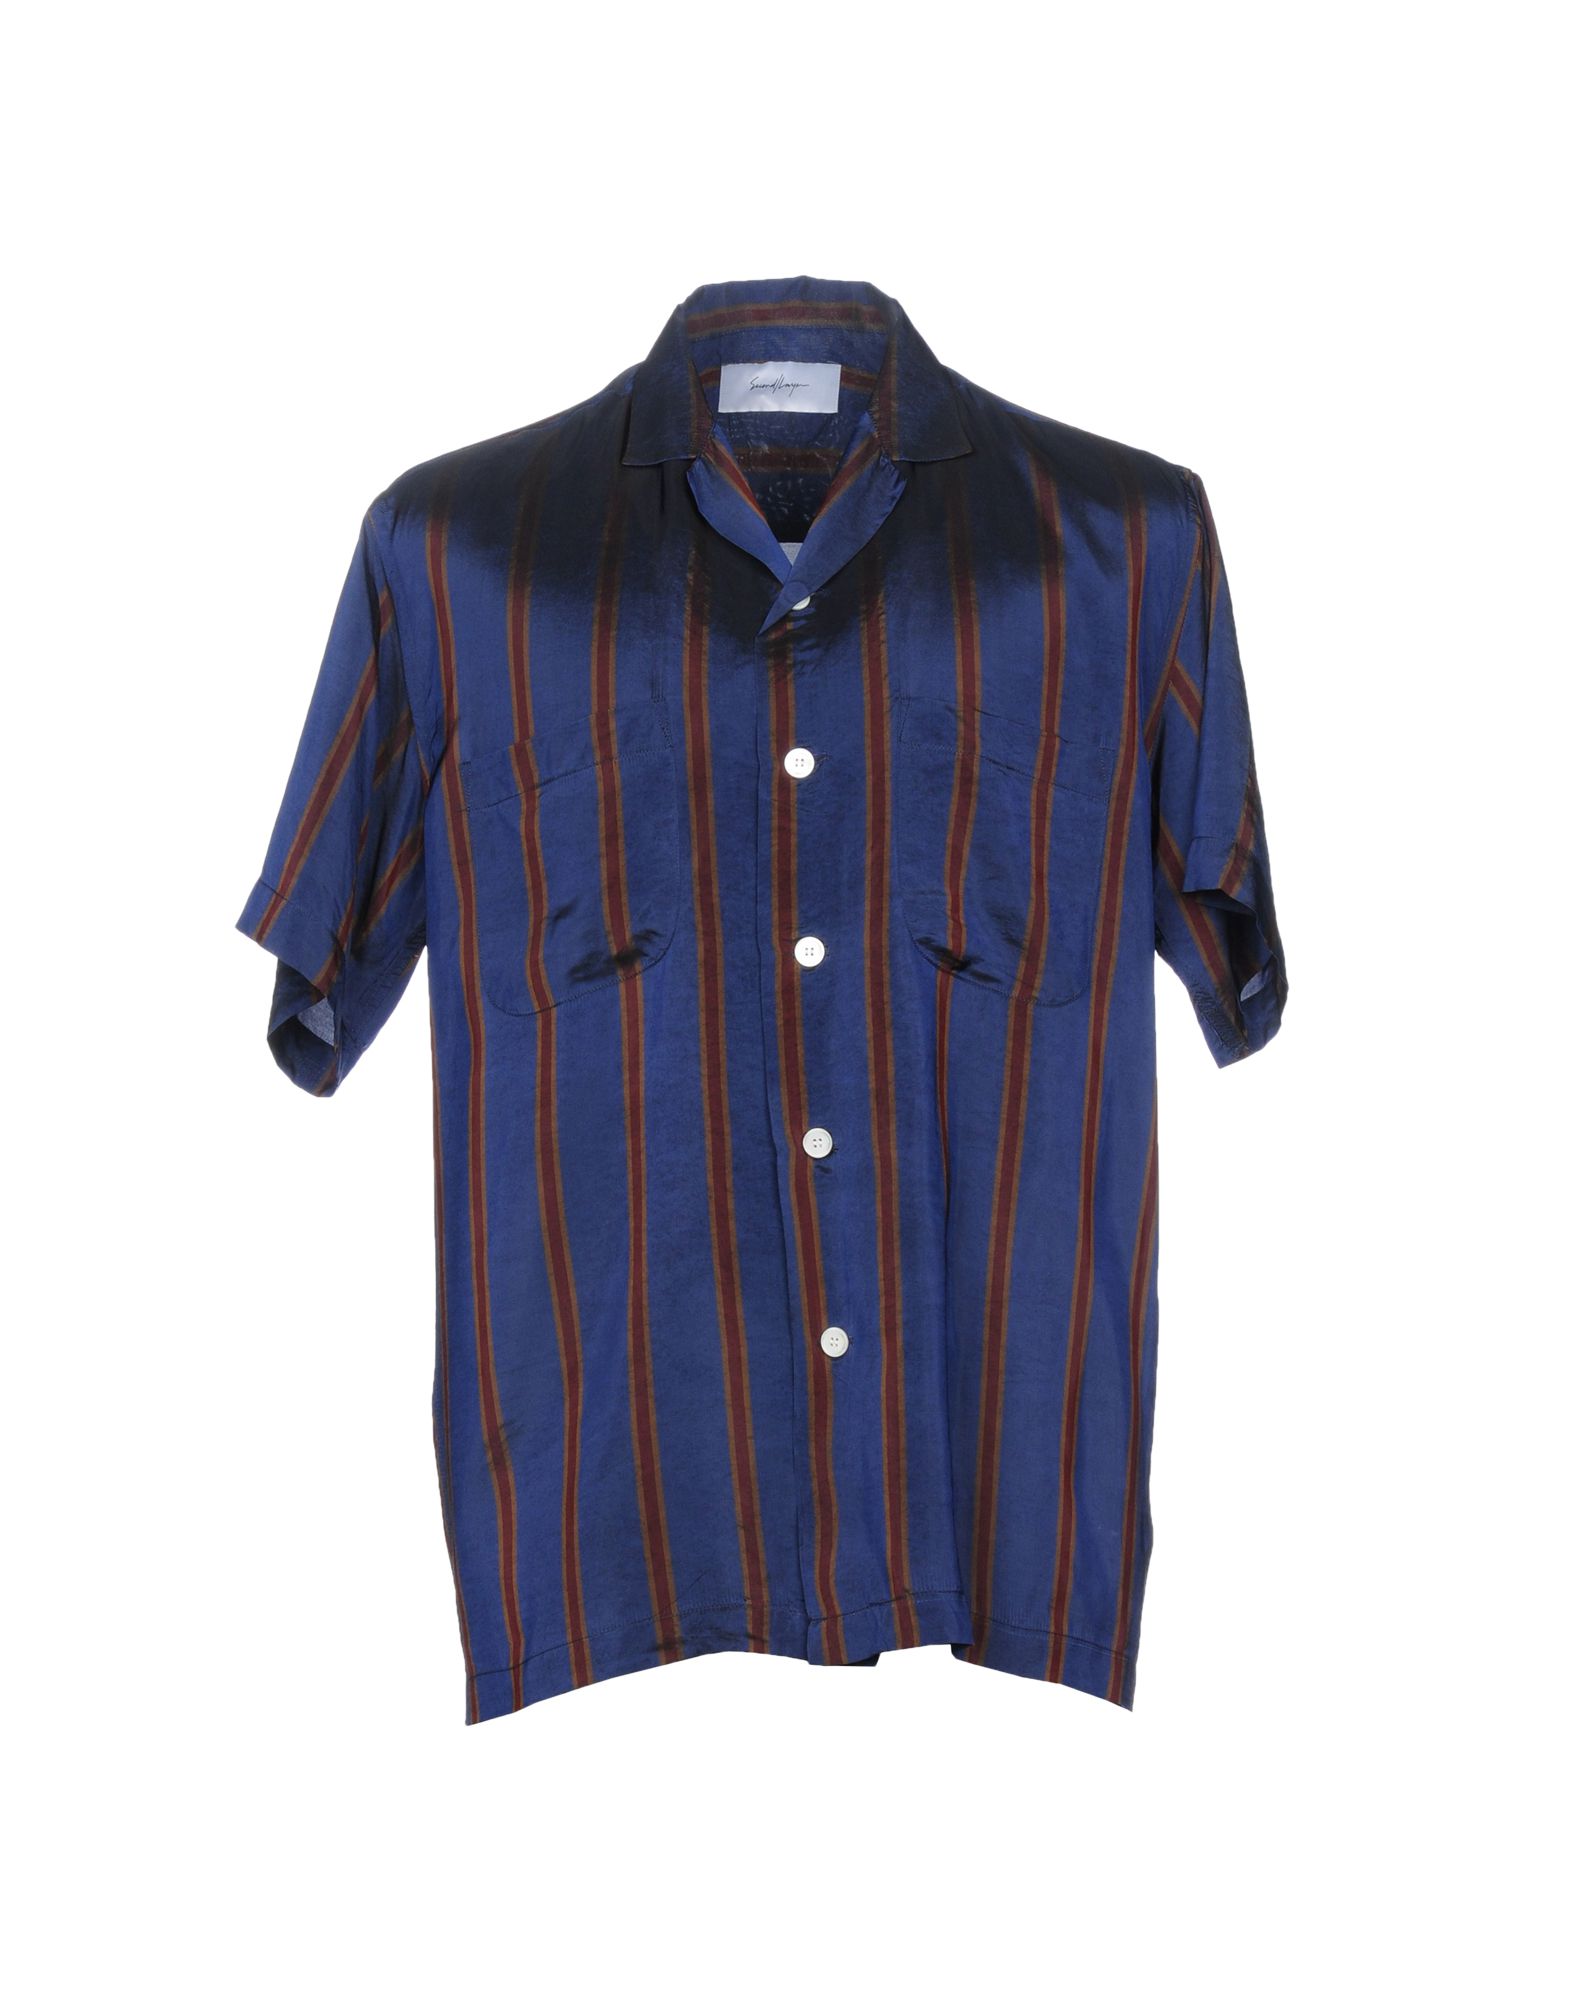 SECOND / LAYER Striped shirt,38732518IT 5